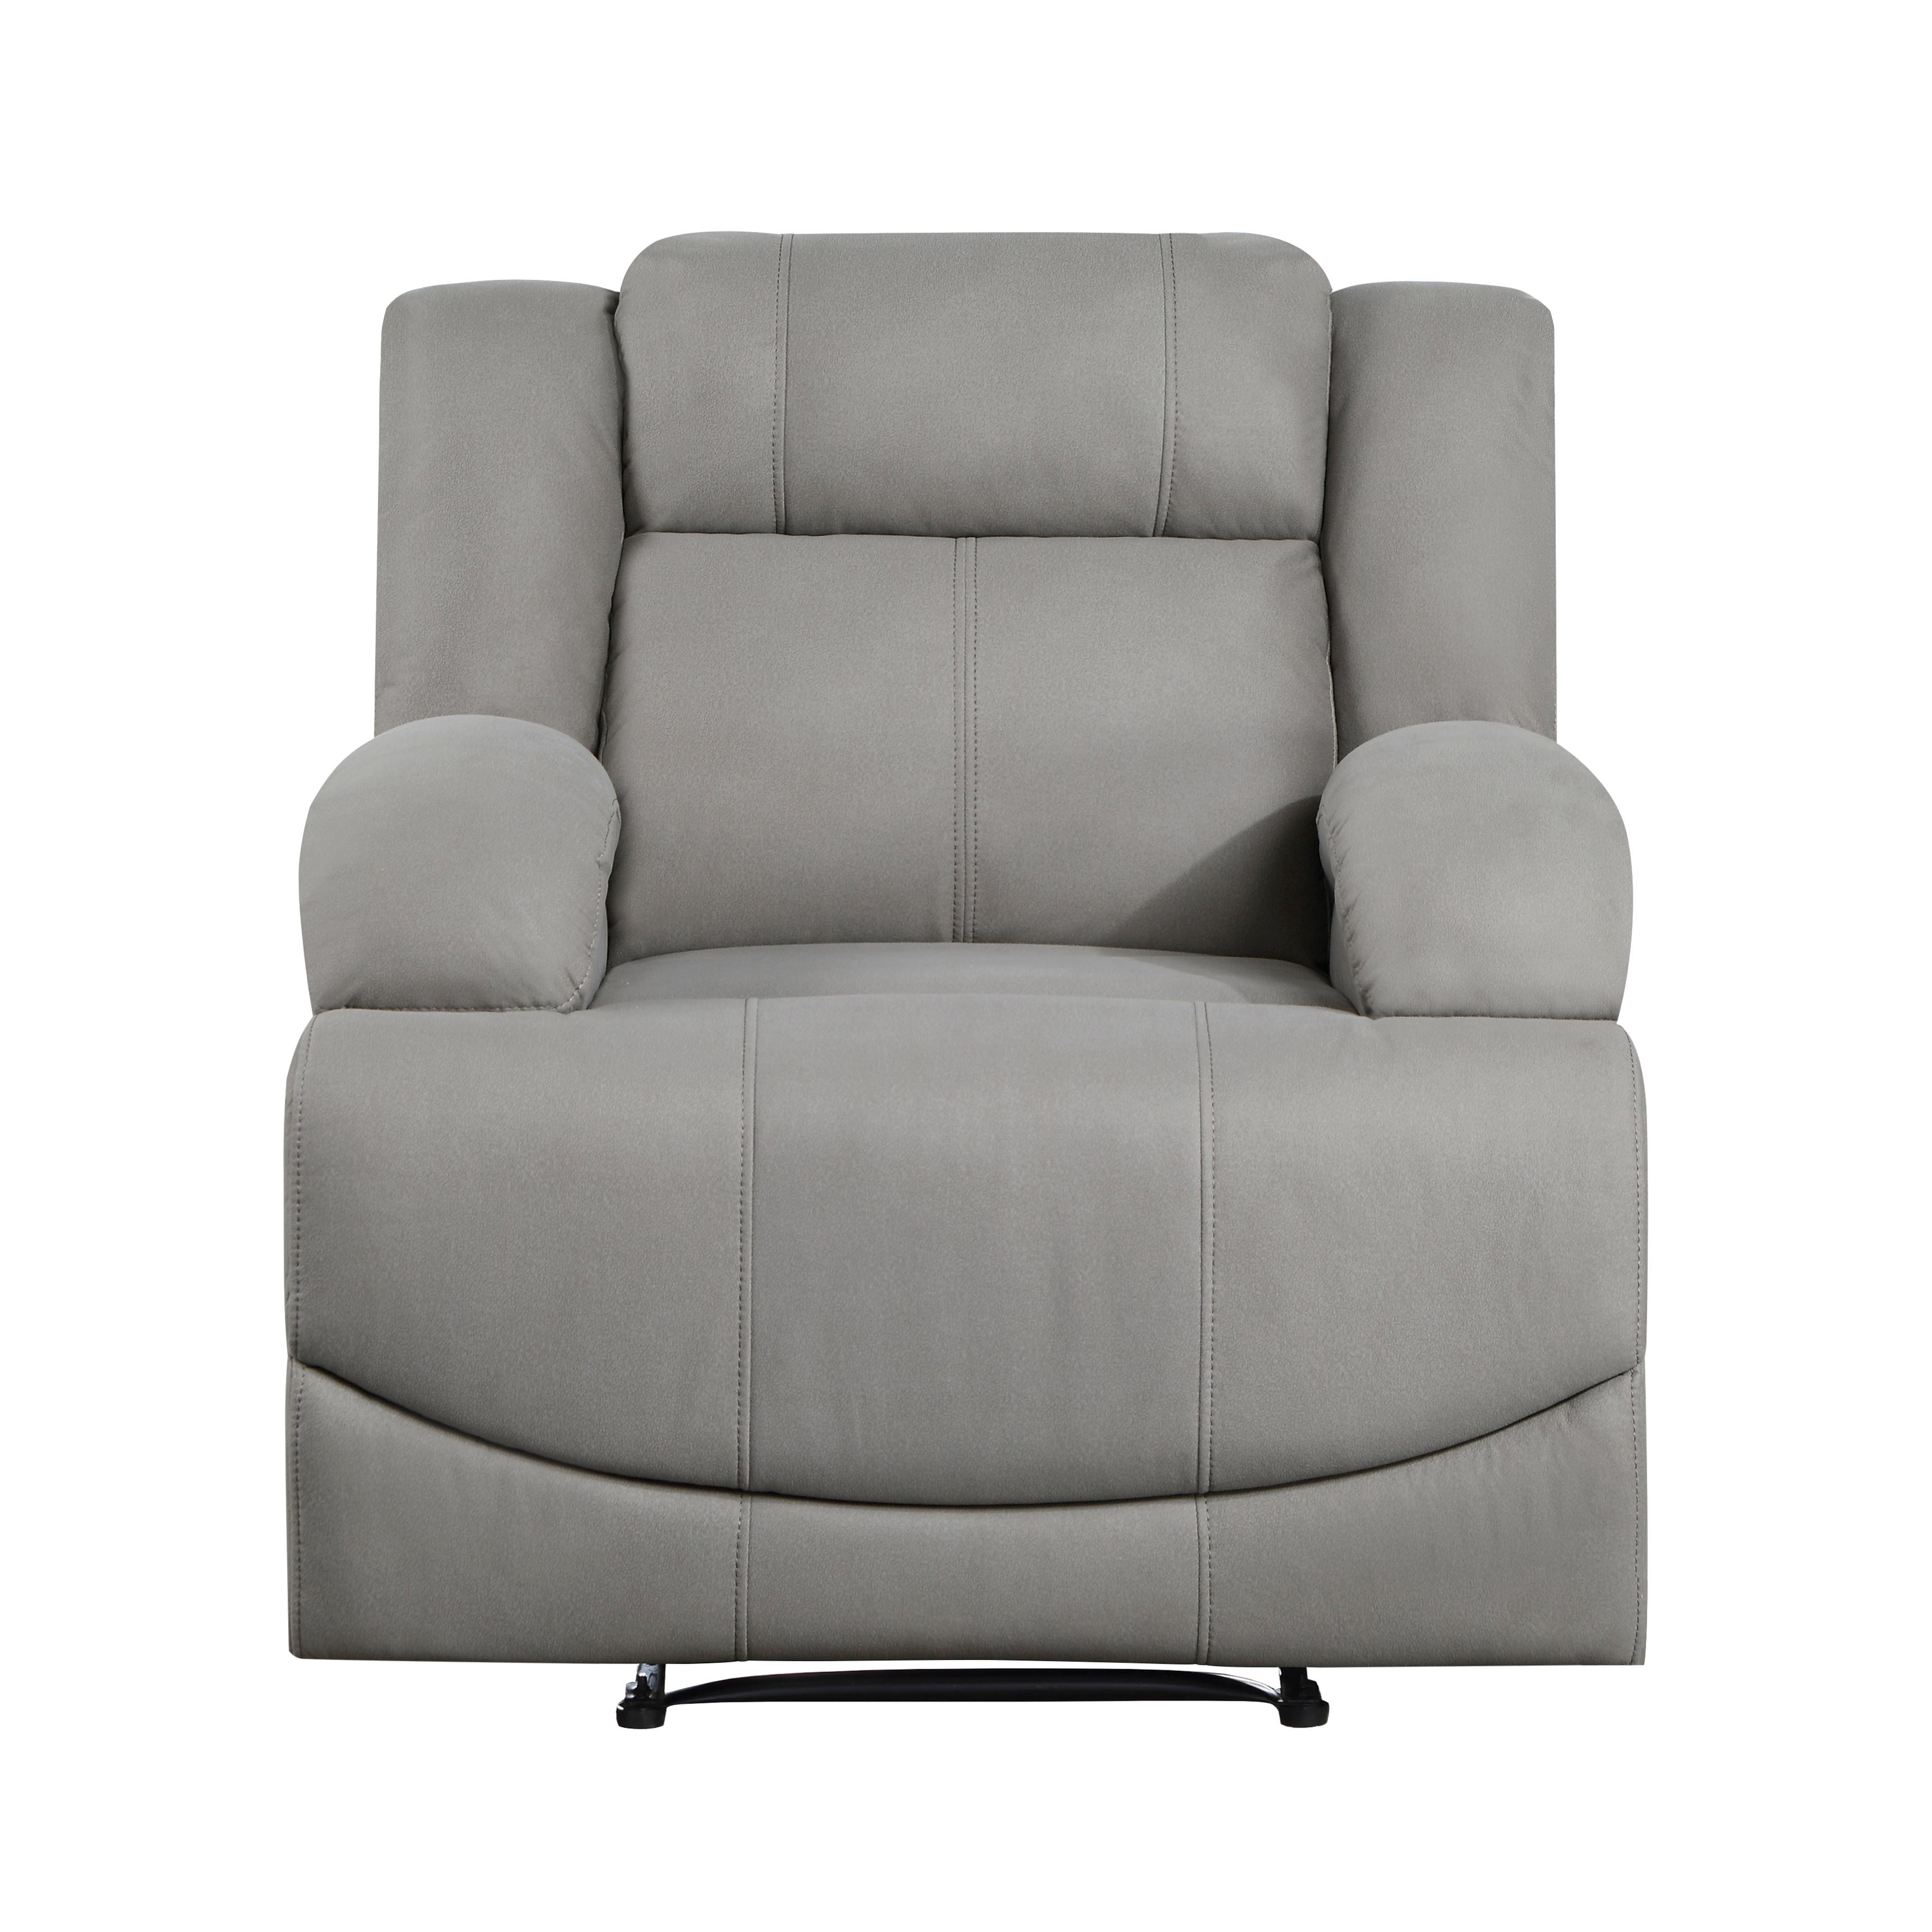 Transitional Reclining Chair 9207GRY-1 Camryn 9207GRY-1 in Gray Microfiber